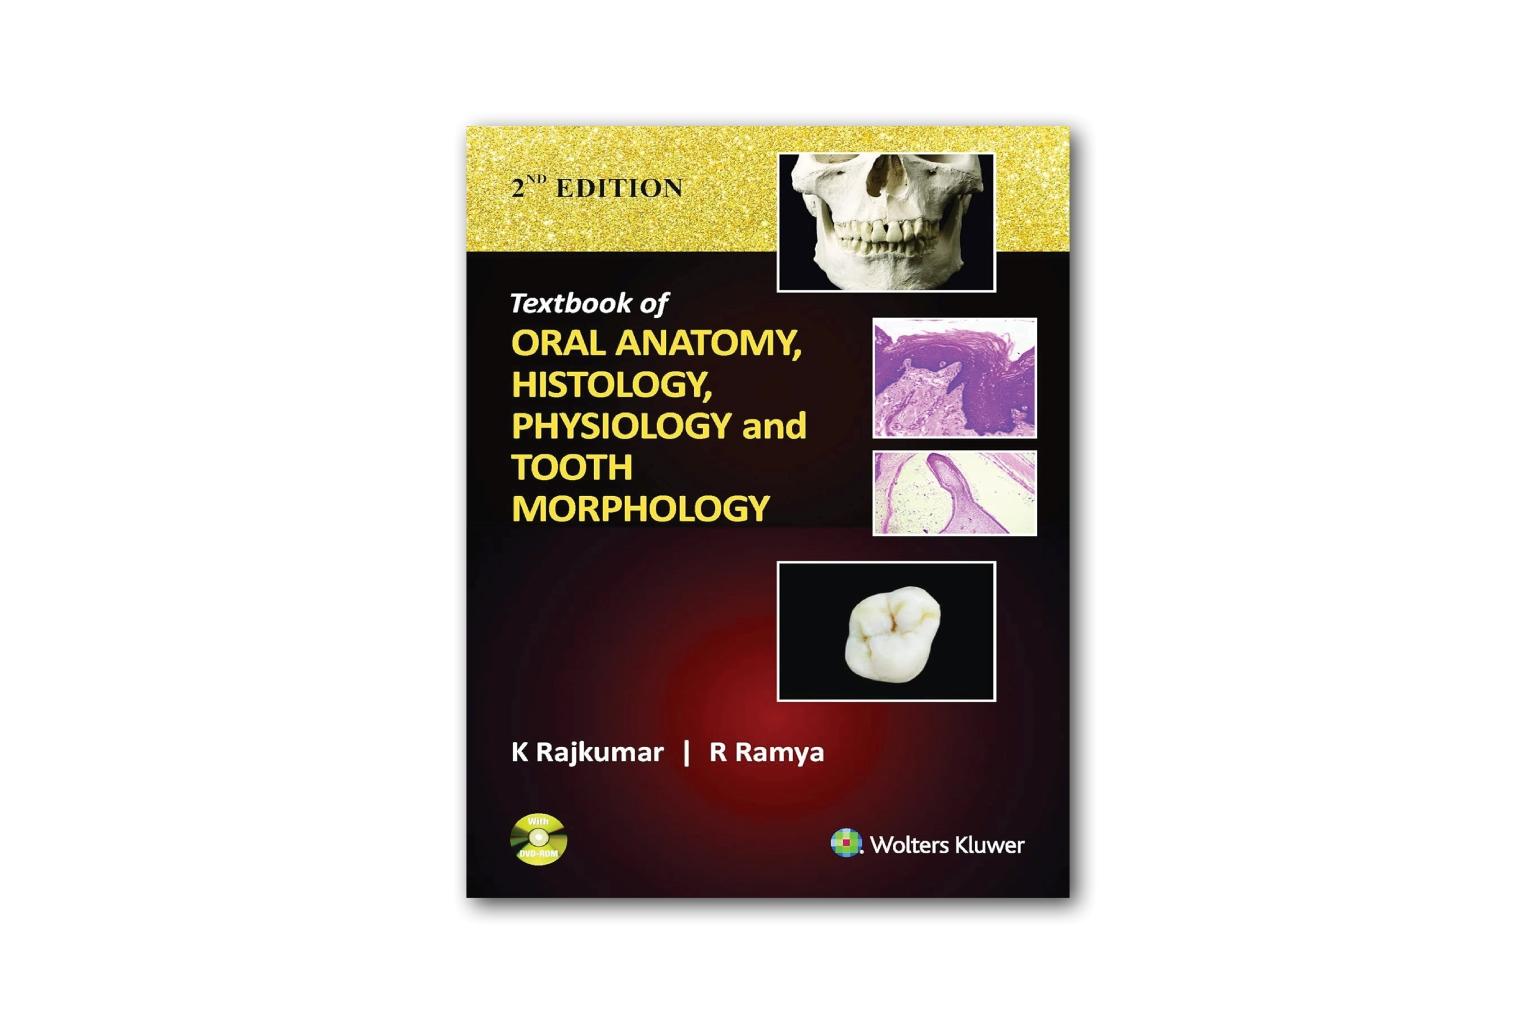 Textbook of Oral Anatomy, History, Physiology and Tooth Morphology